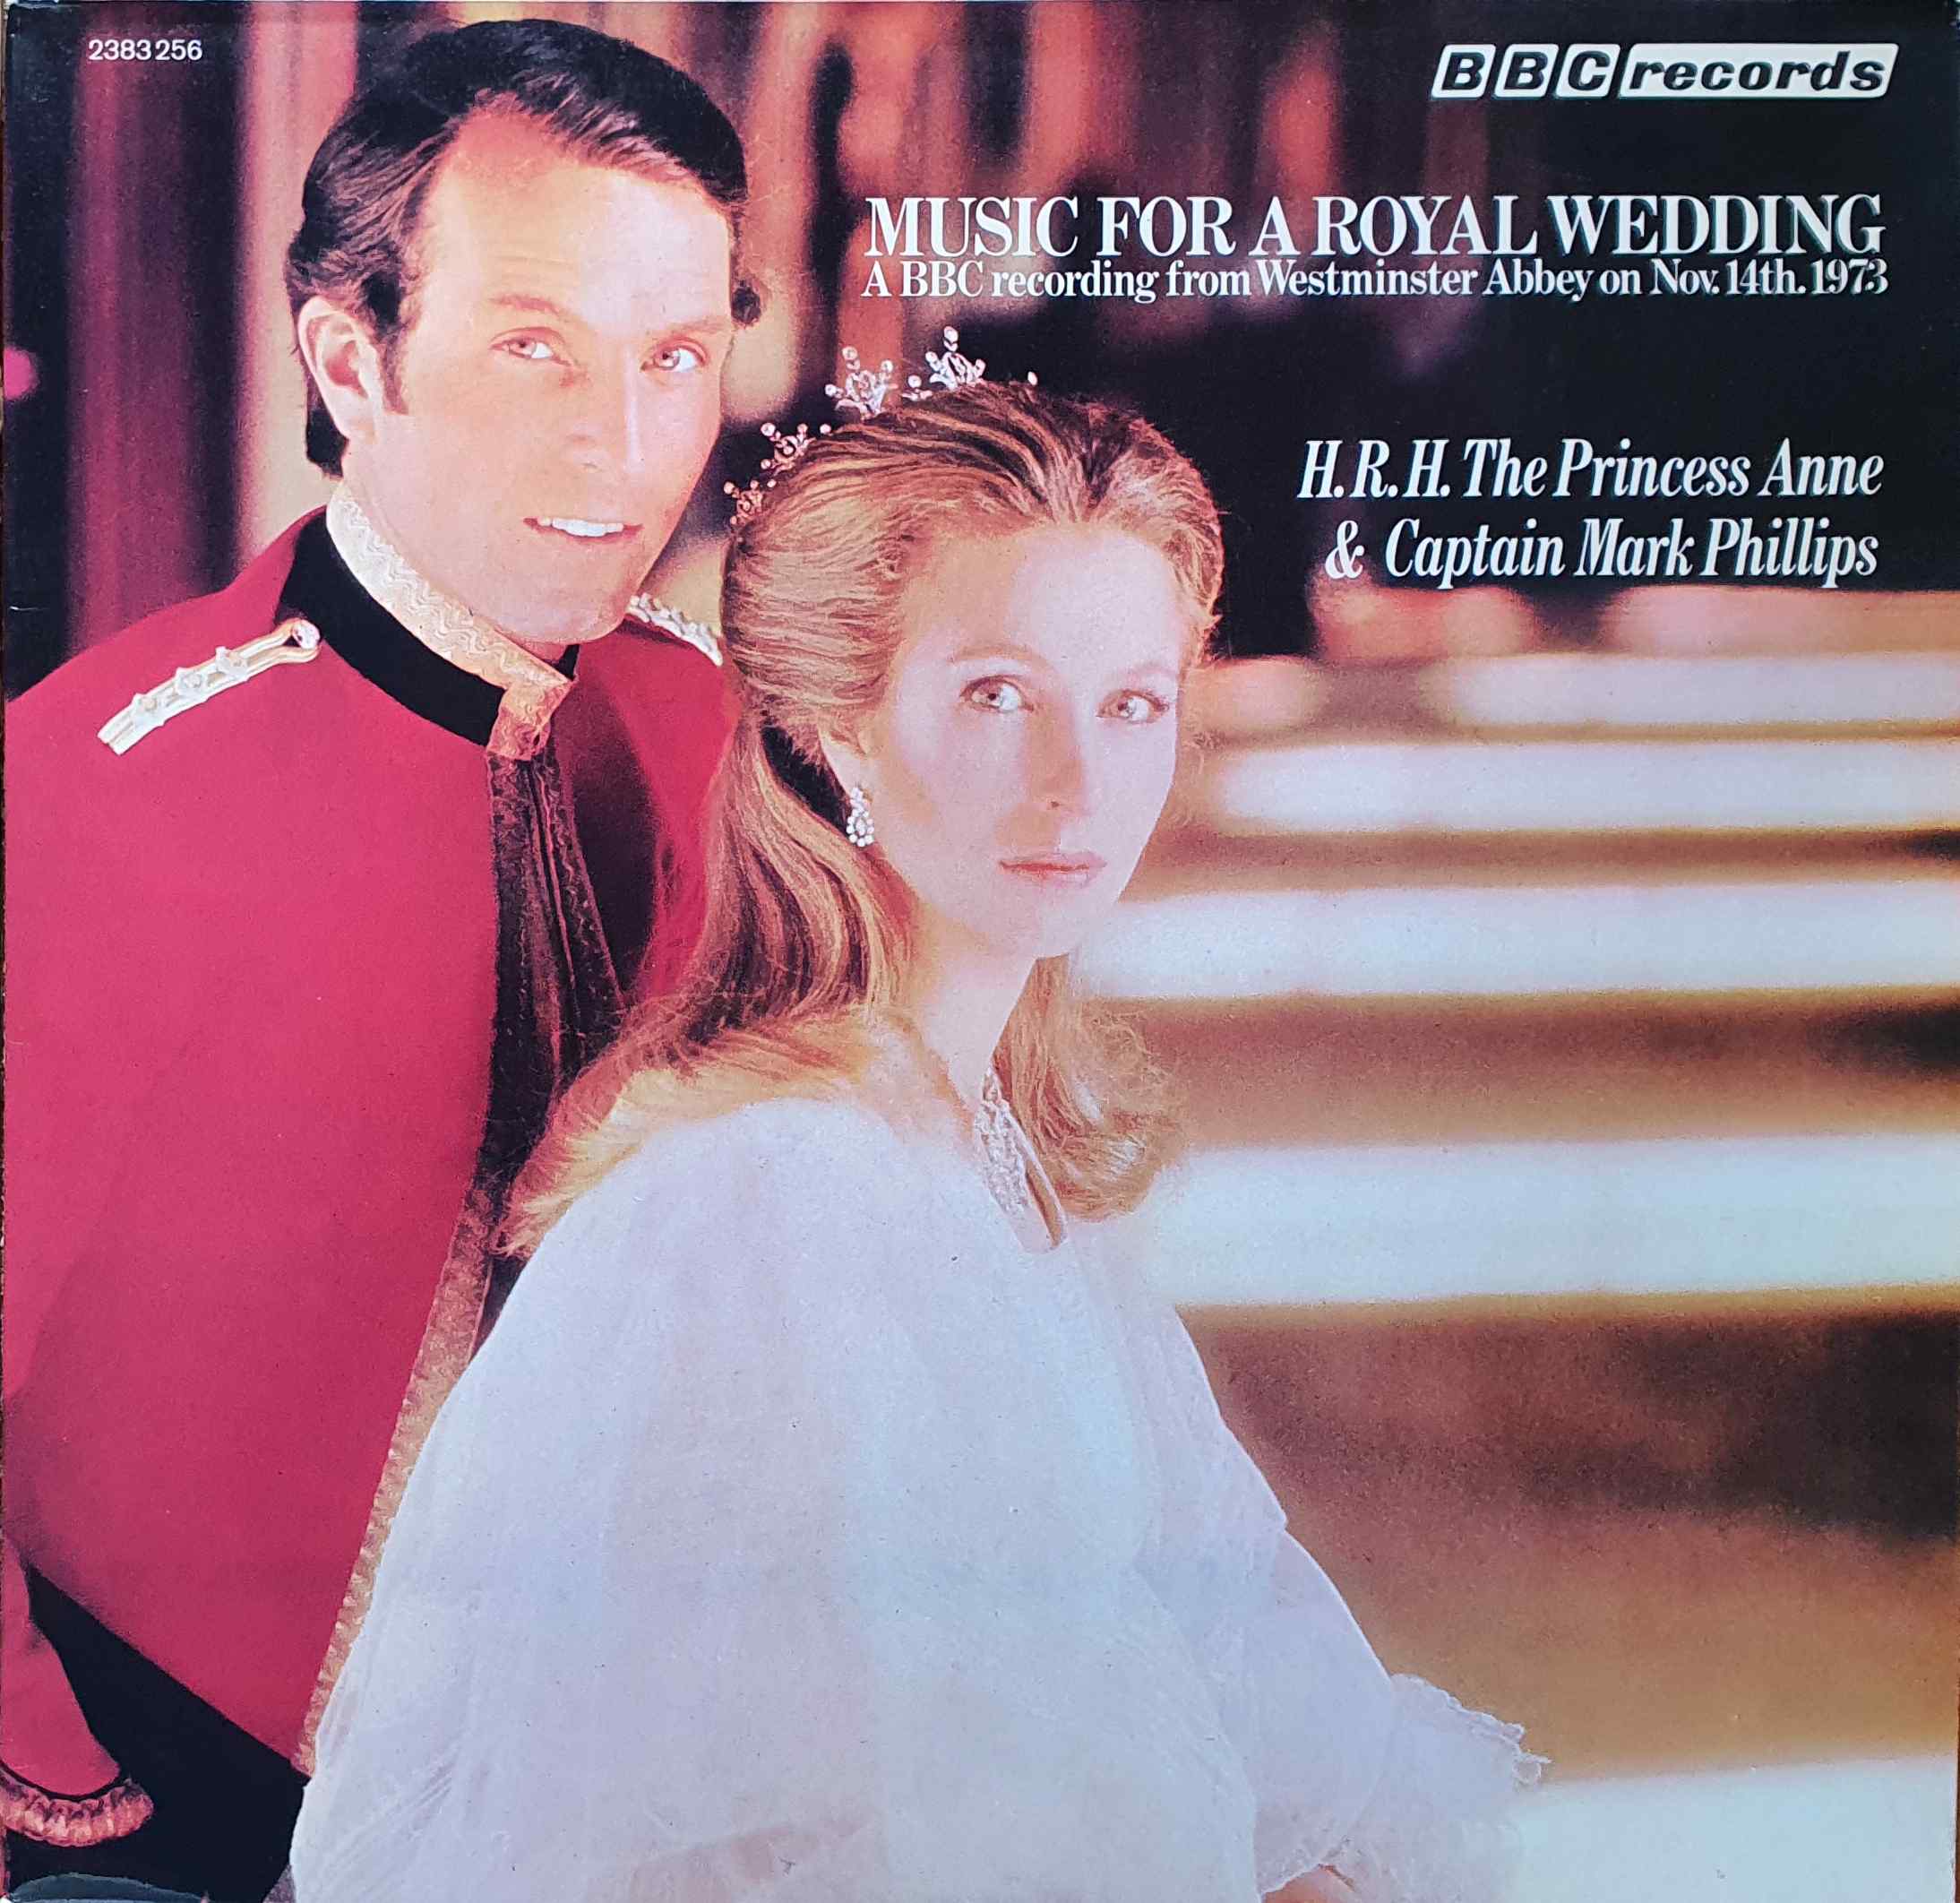 Picture of 2383 256 Music for a Royal wedding by artist Various from the BBC albums - Records and Tapes library